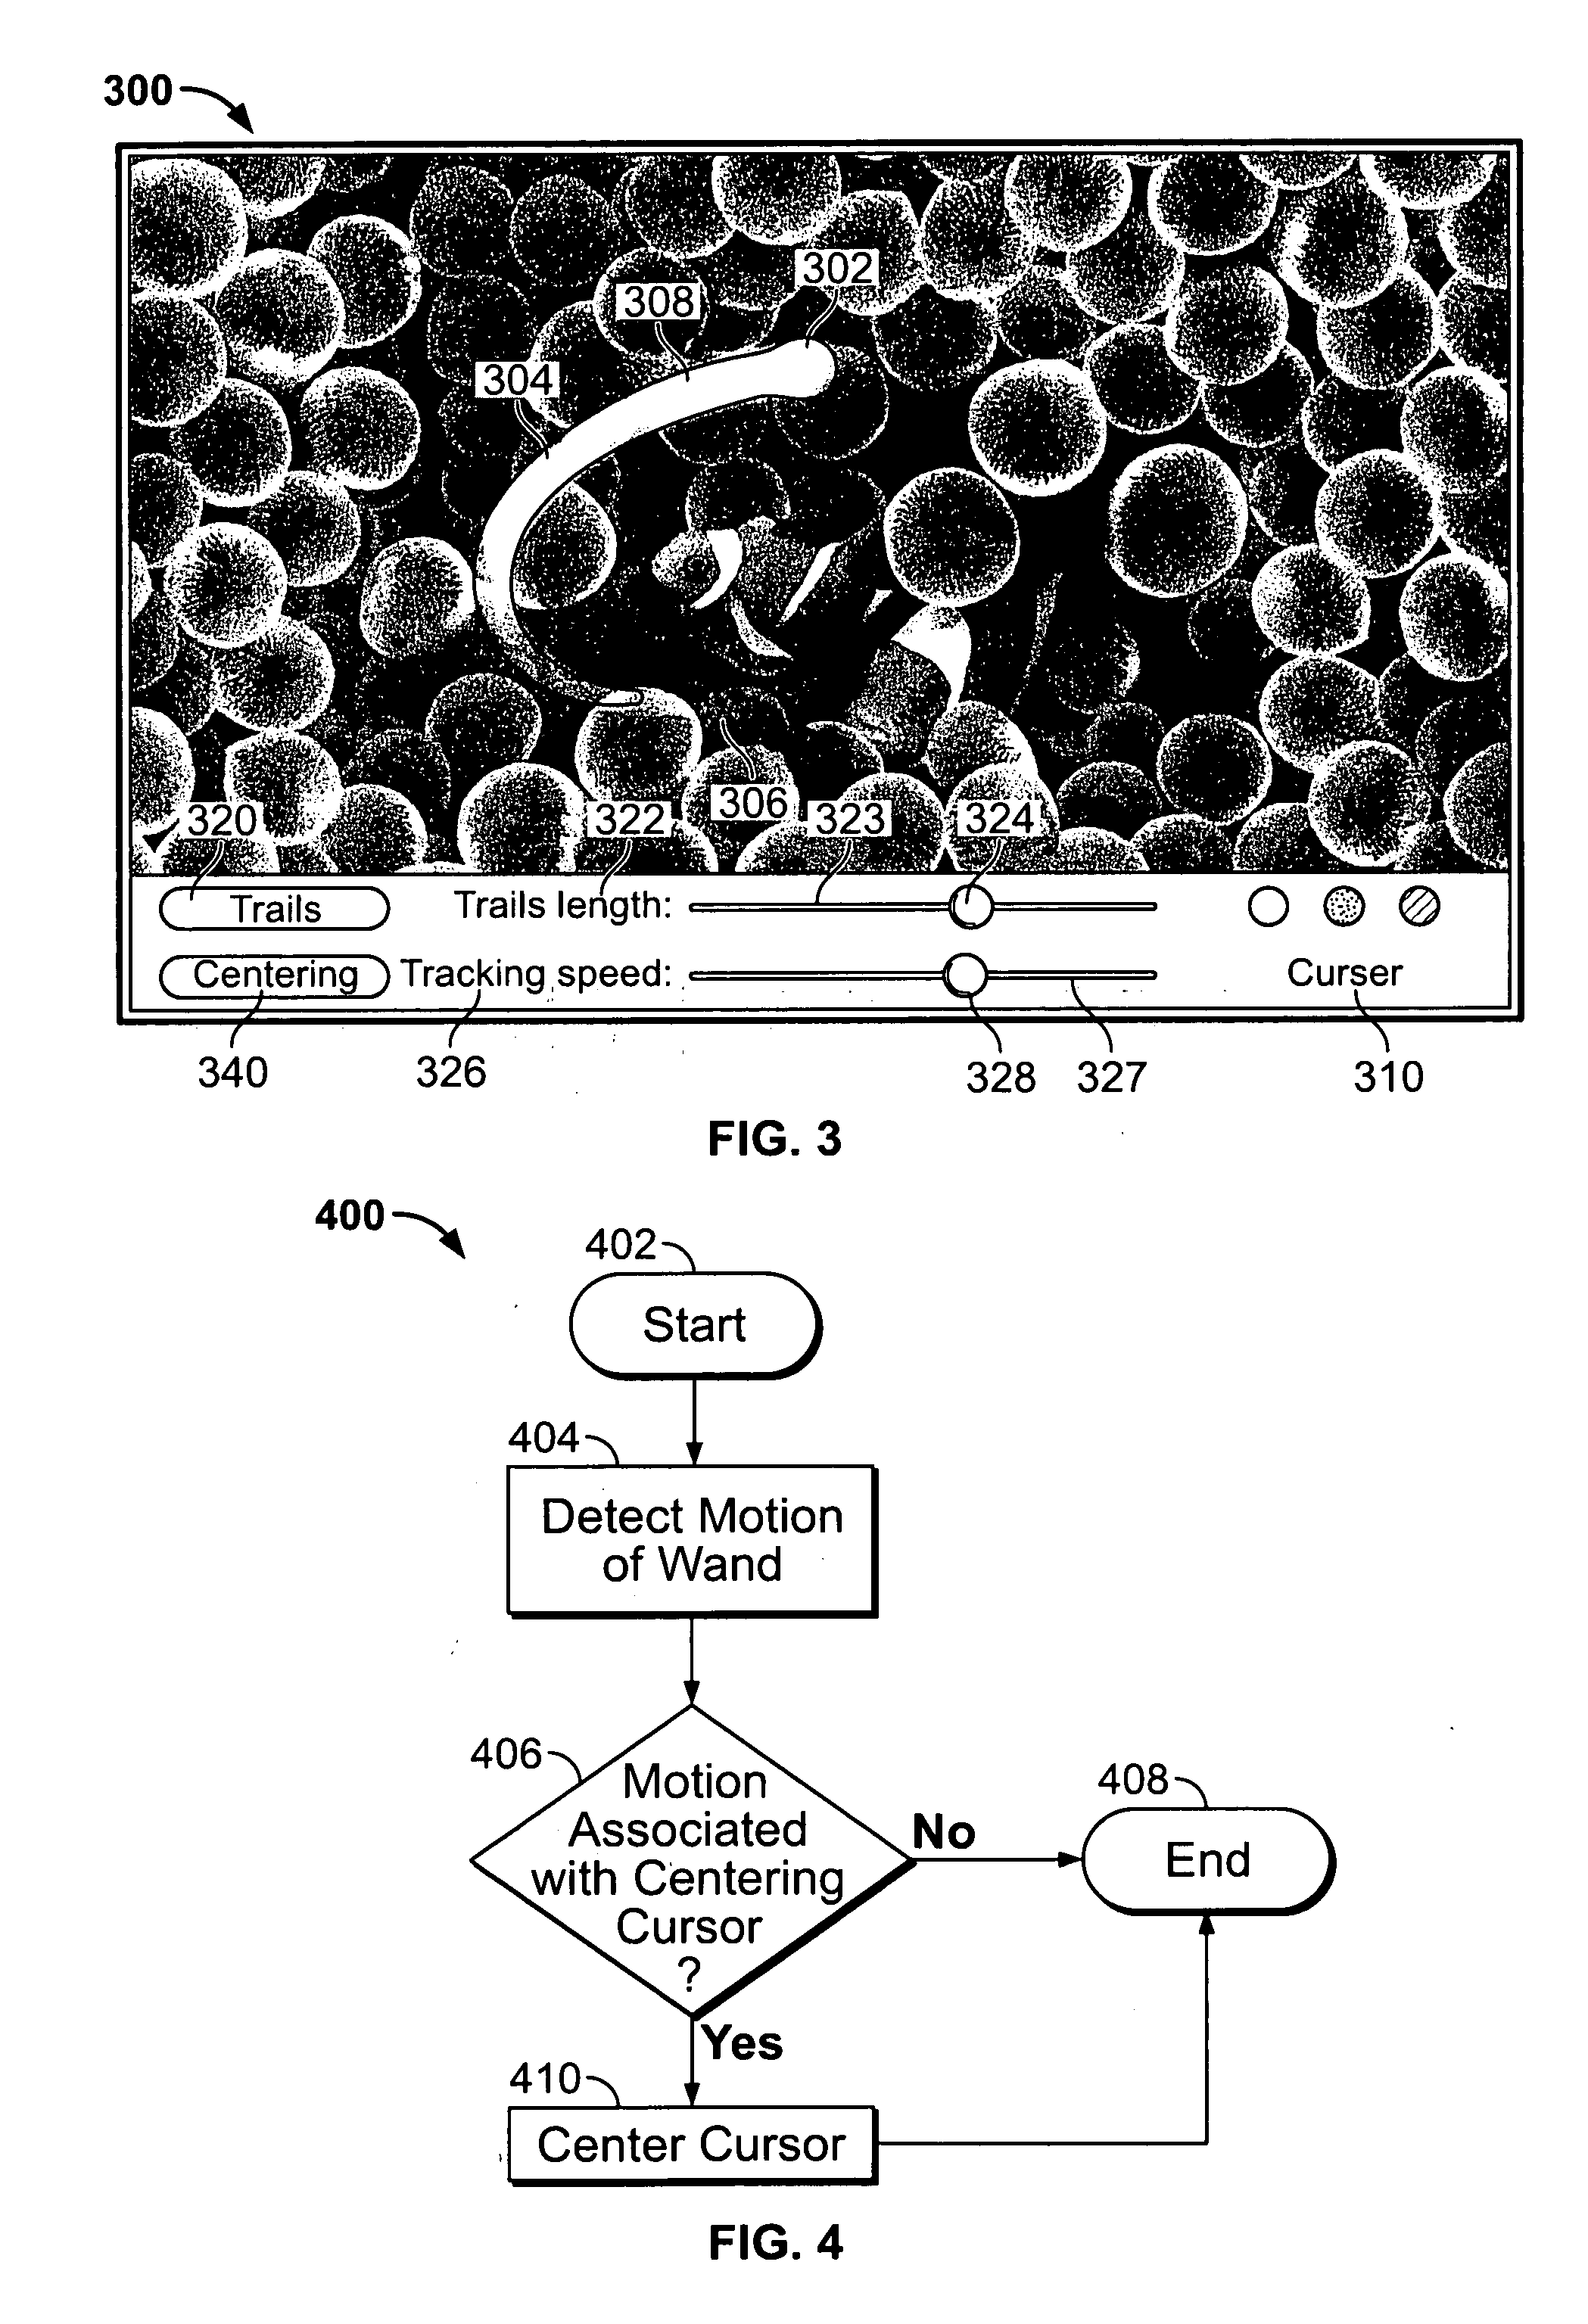 Use of a remote controller Z-direction input mechanism in a media system